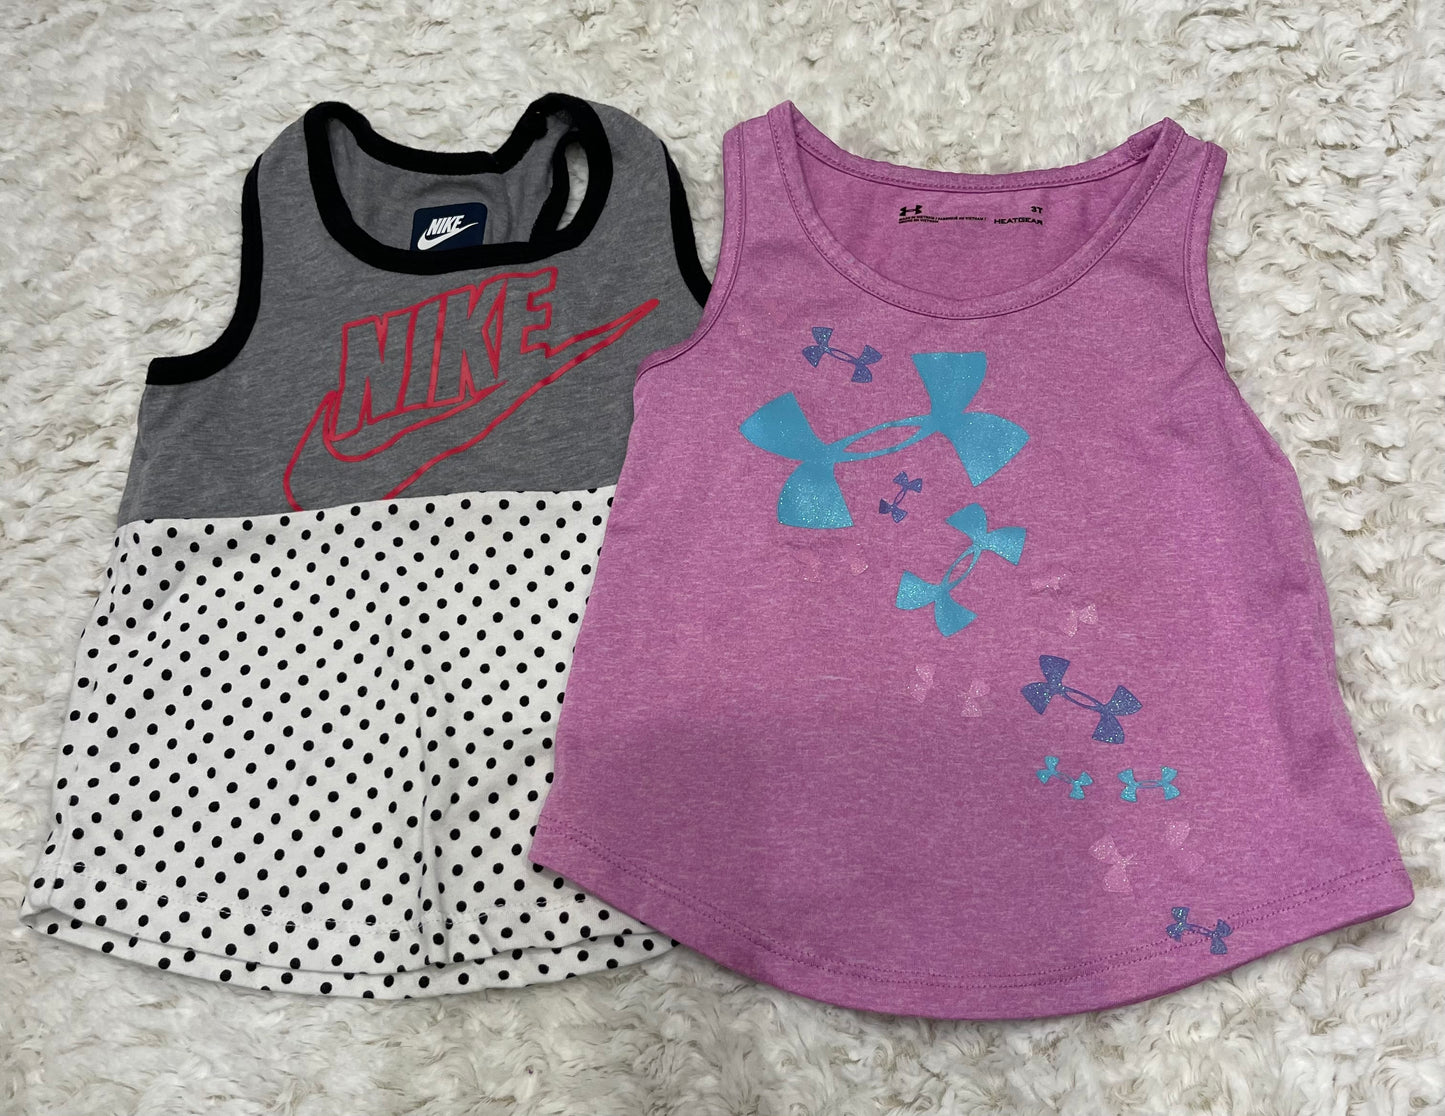 3T Nike and Under Armour tanks